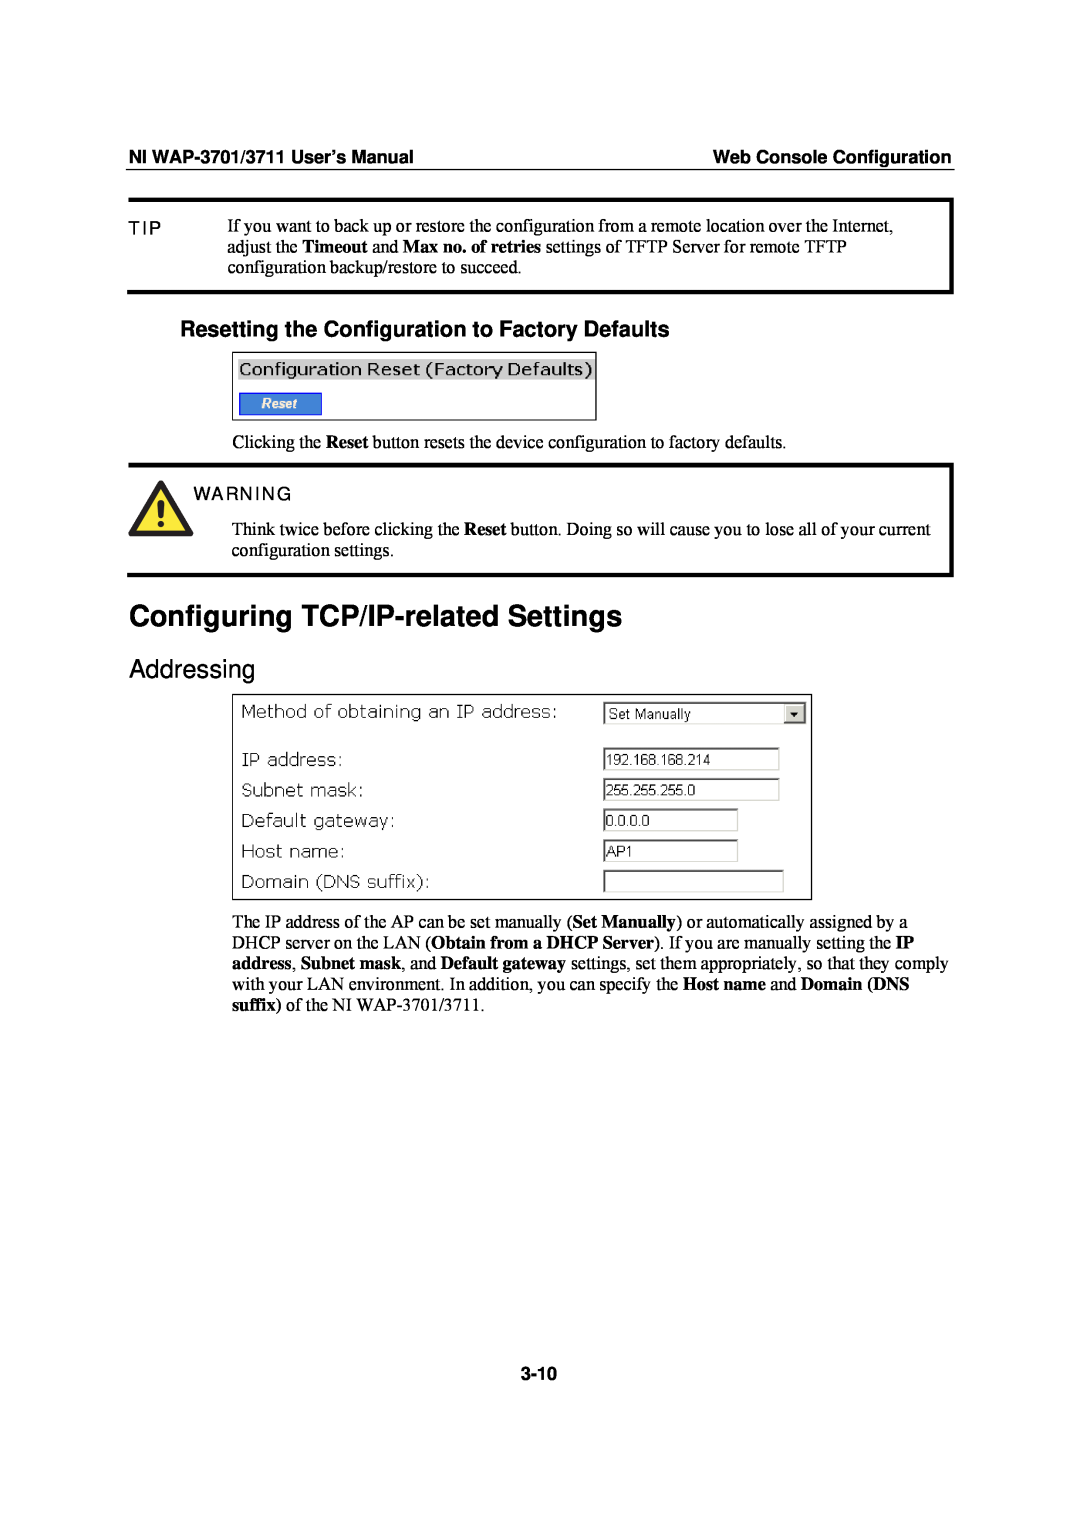 National Instruments WAP-3711 Configuring TCP/IP-related Settings, Addressing, NI WAP-3701/3711 User’s Manual, 3-10 